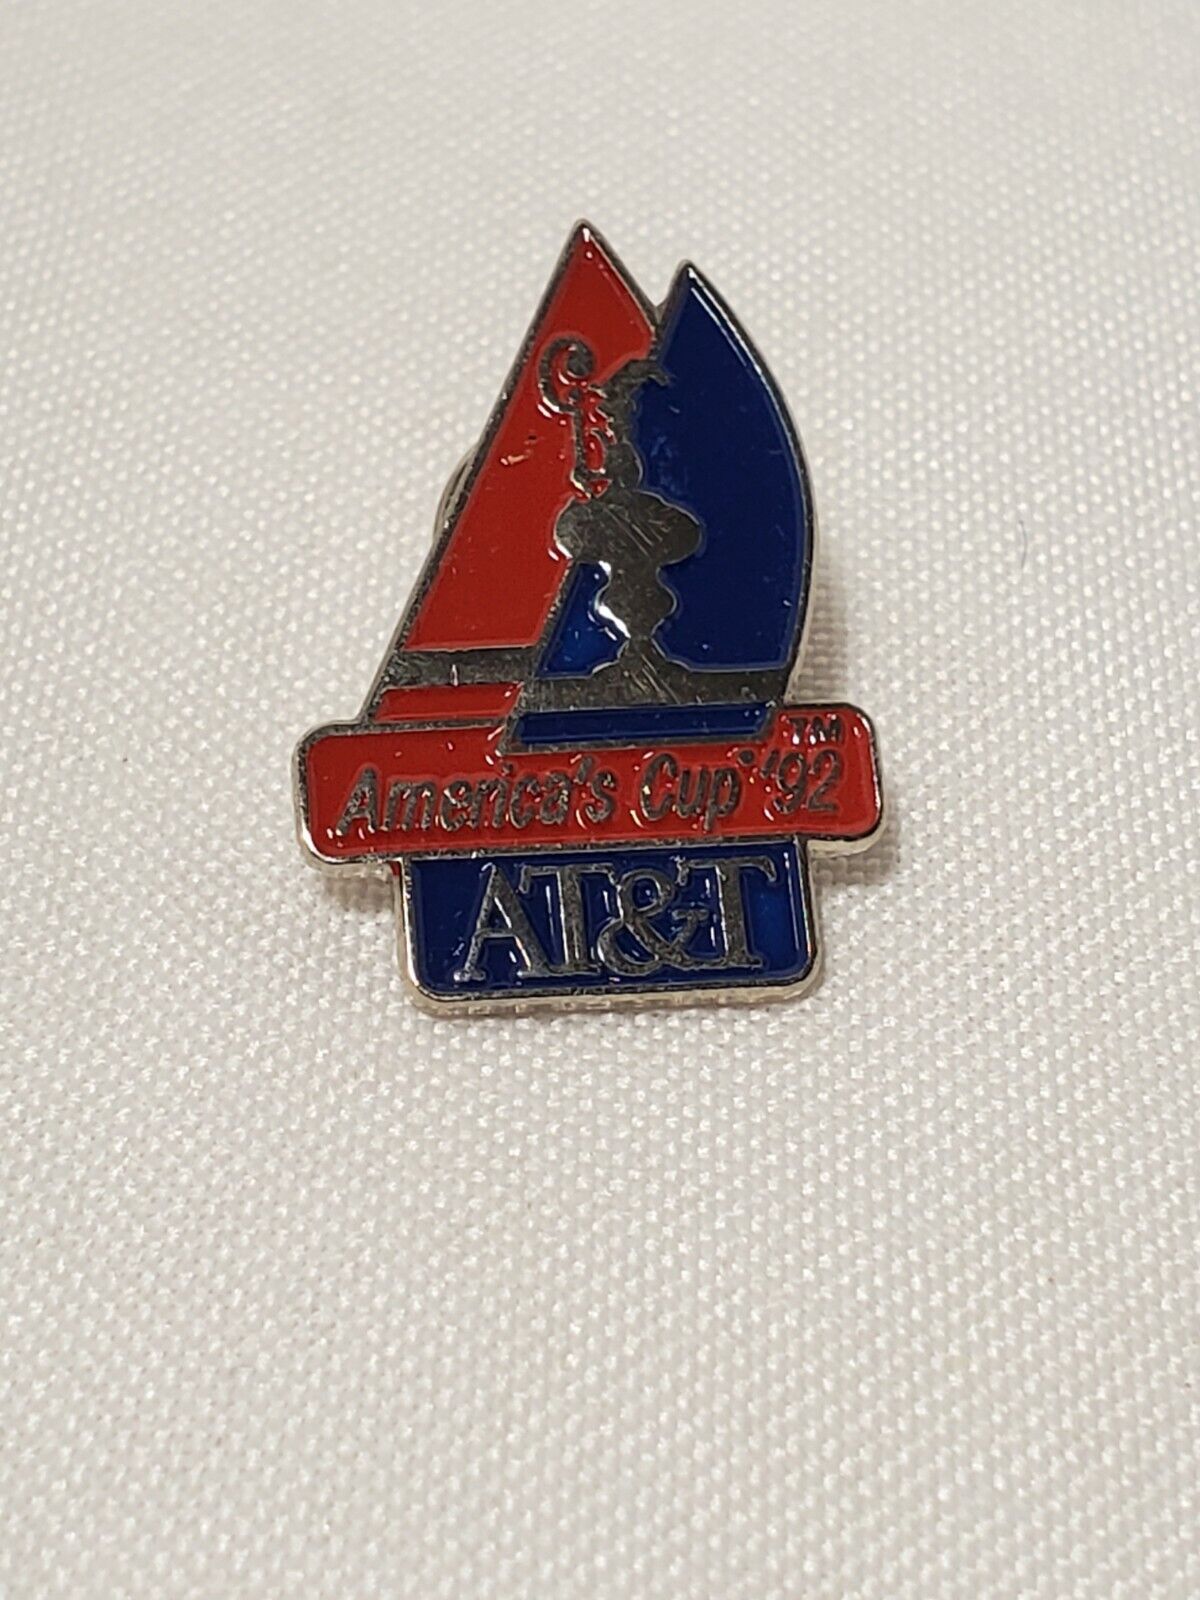 1992 AT&T America's Cup Yachting Boating ,Race Pin